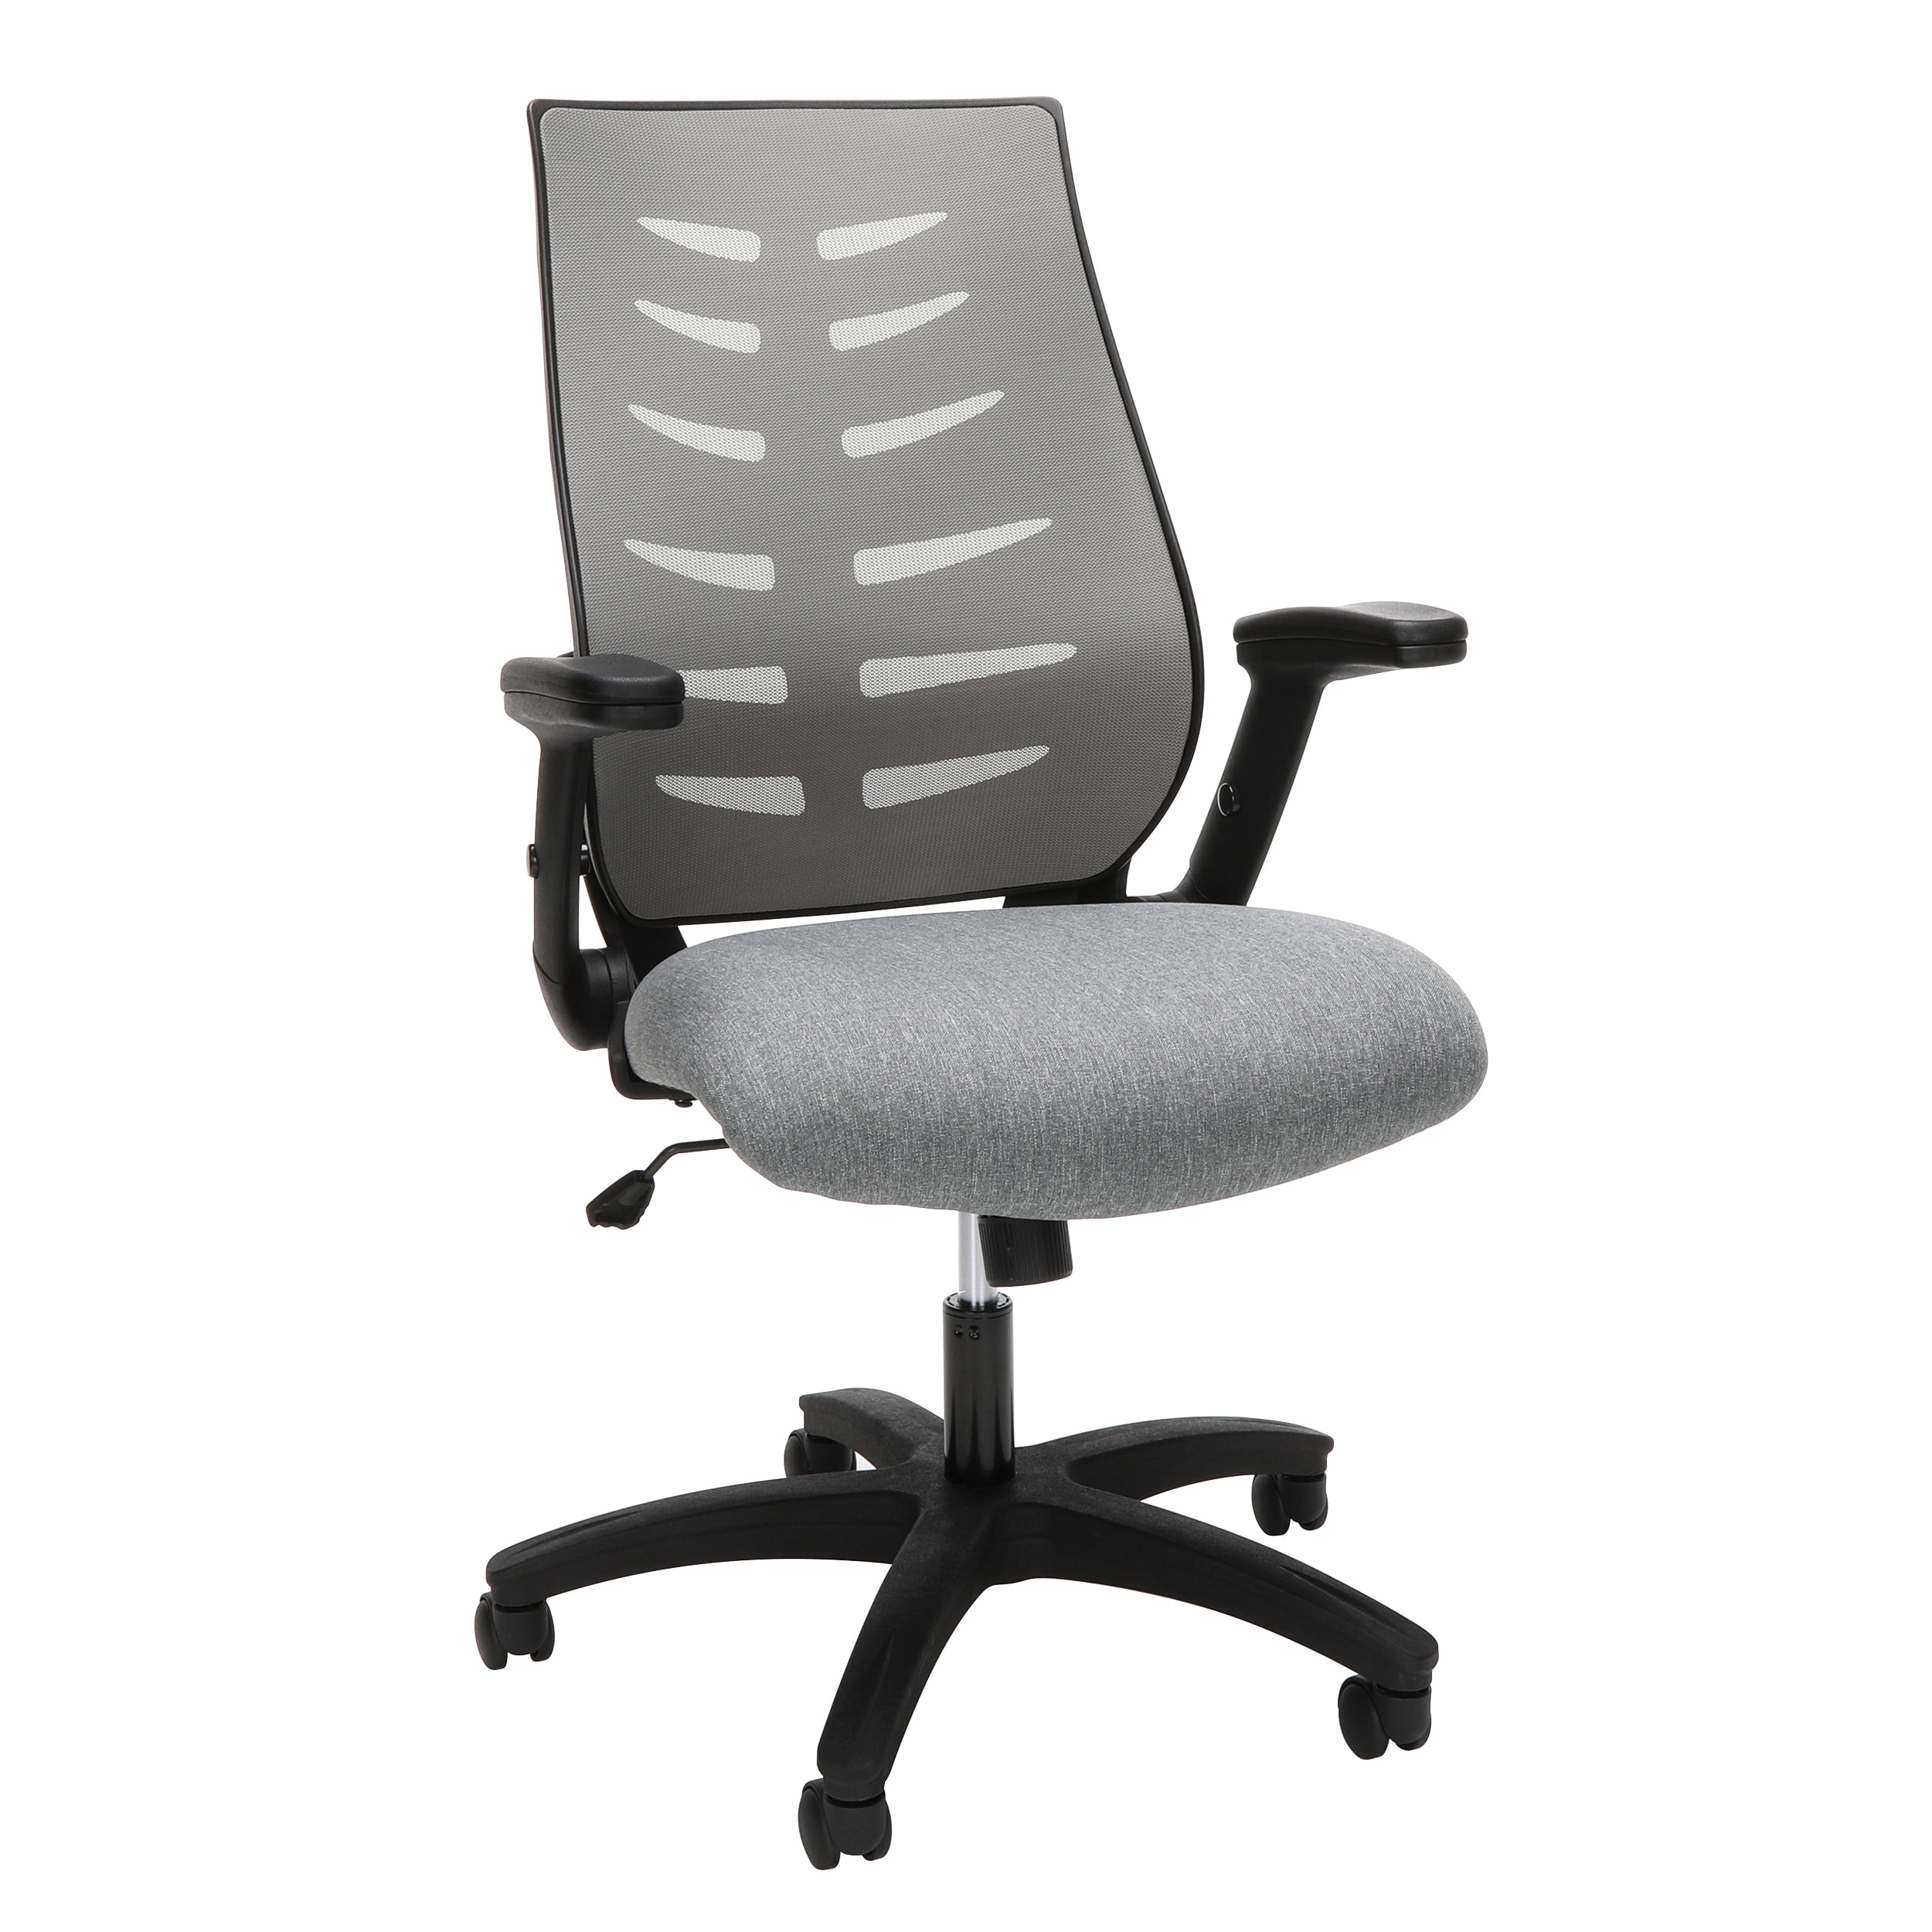 OFM Midback Mesh Office Chair for Computer Desk, Gray (530-GRY